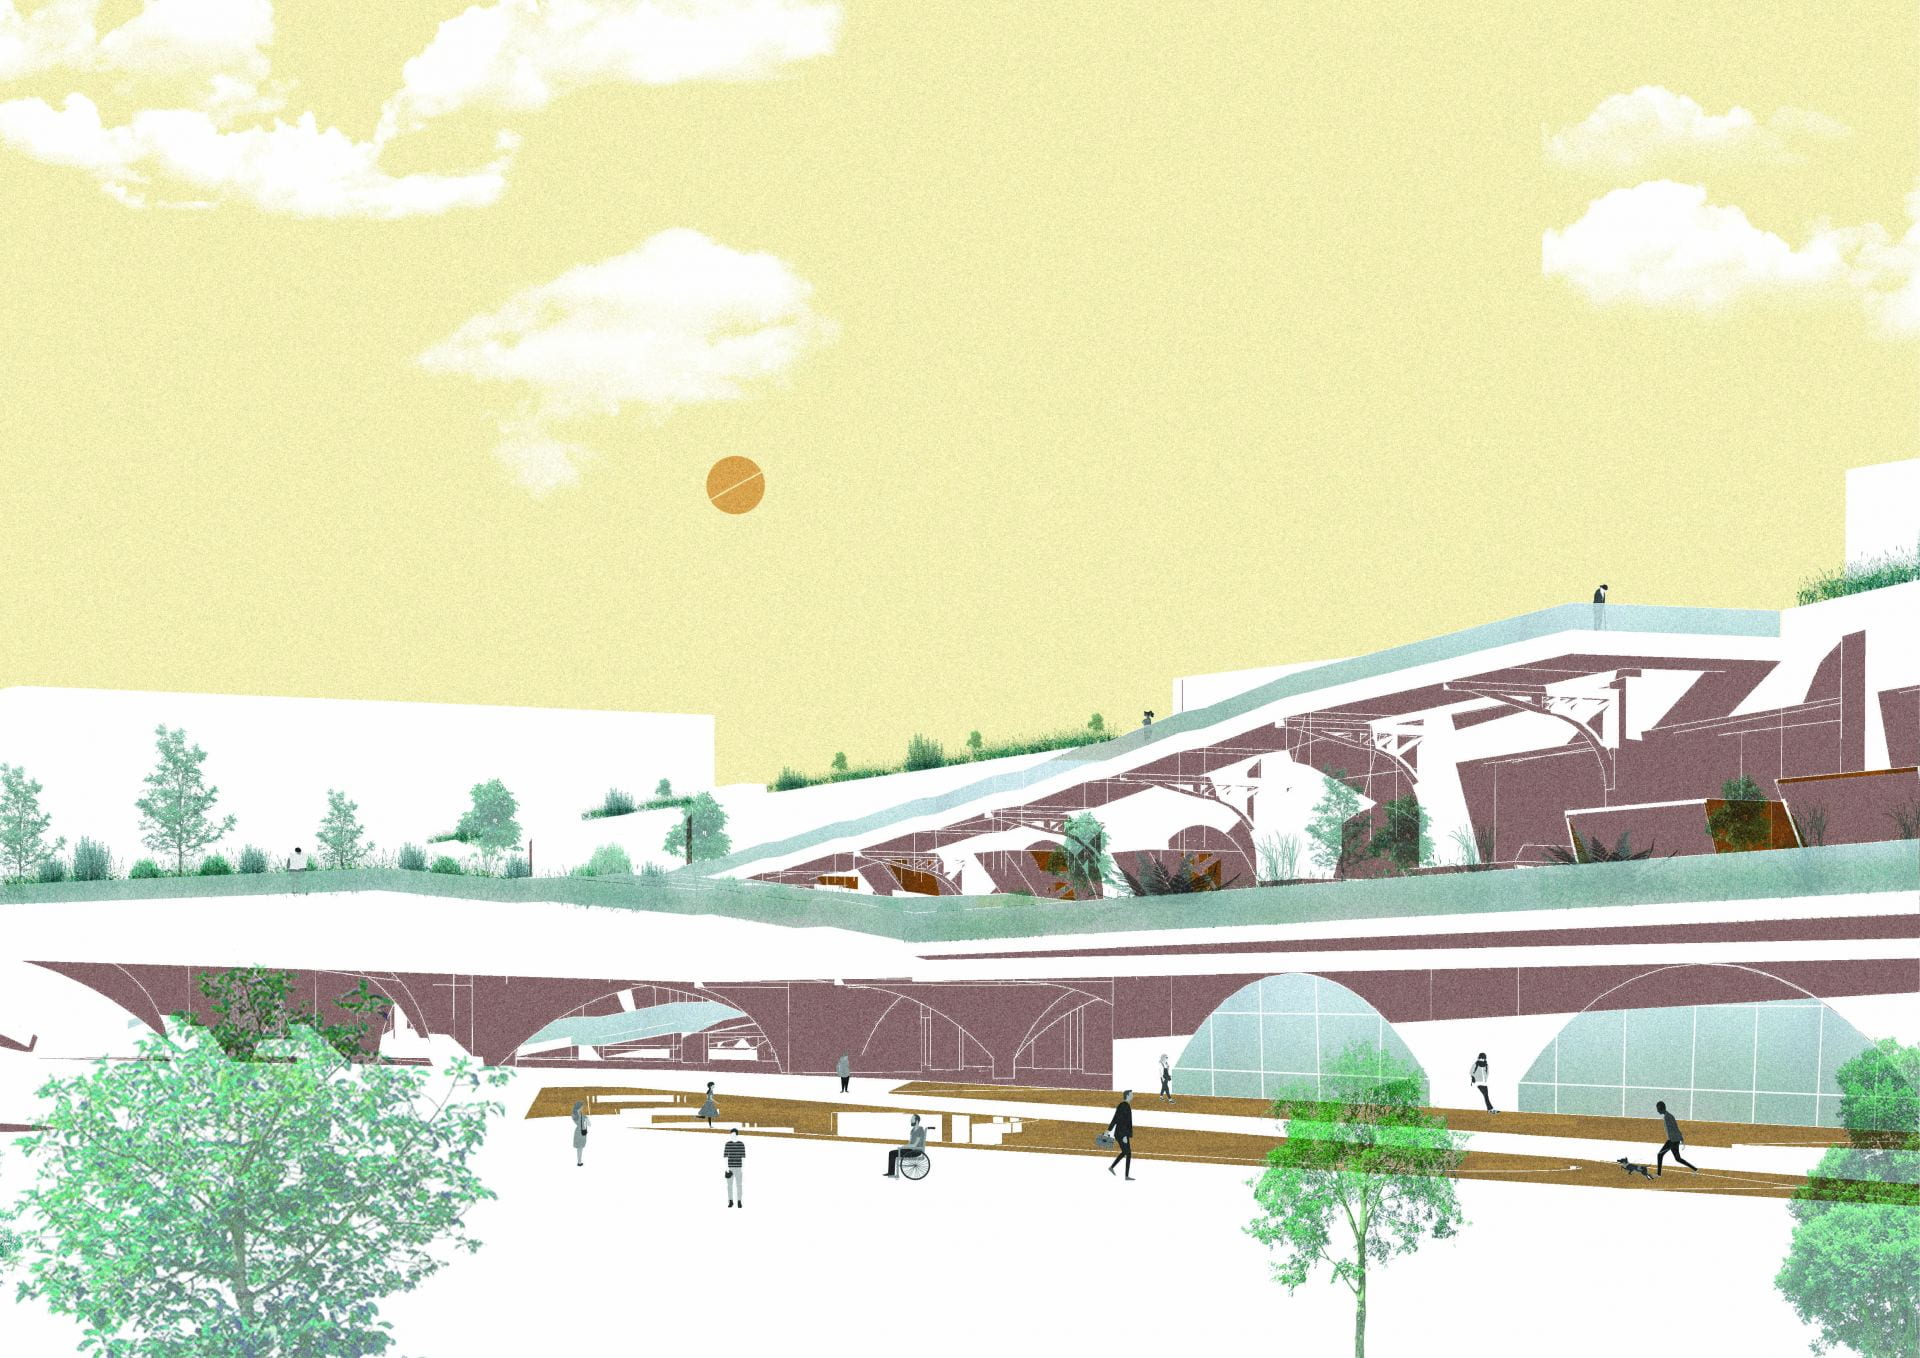 An illustration showing a viaduct.